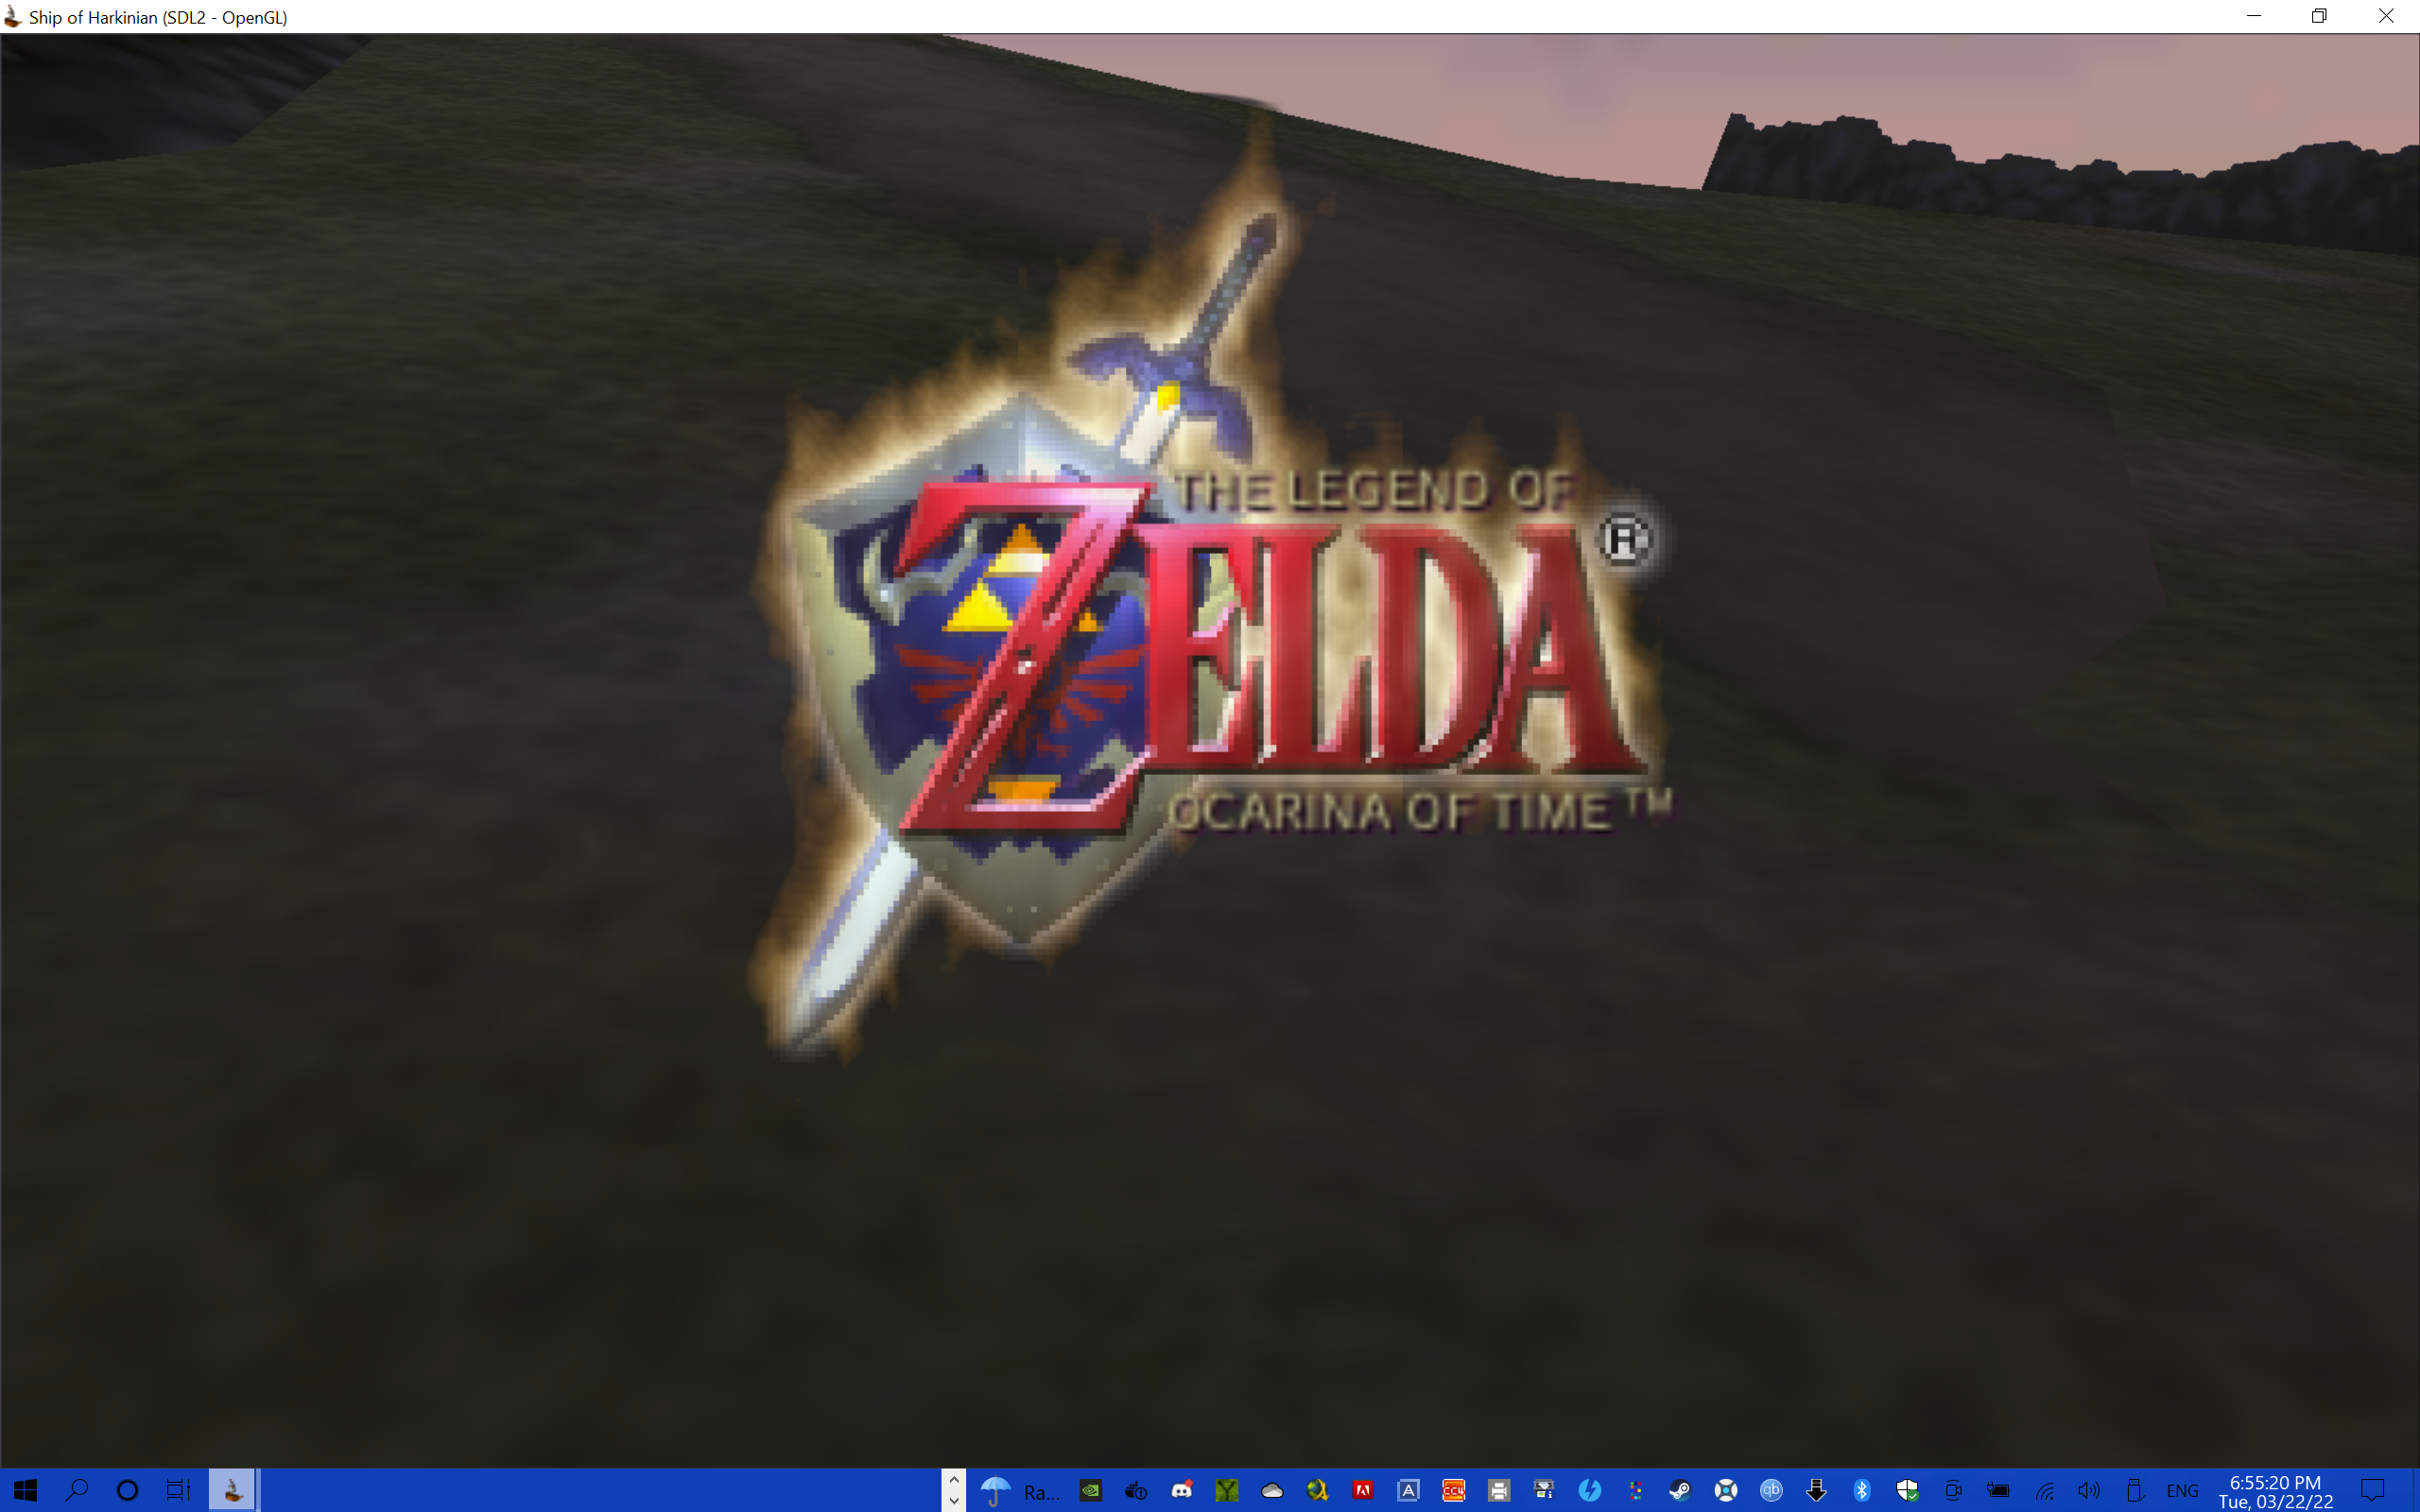 Zelda: Ocarina Of Time Fan-Made PC Port Is Out And Already